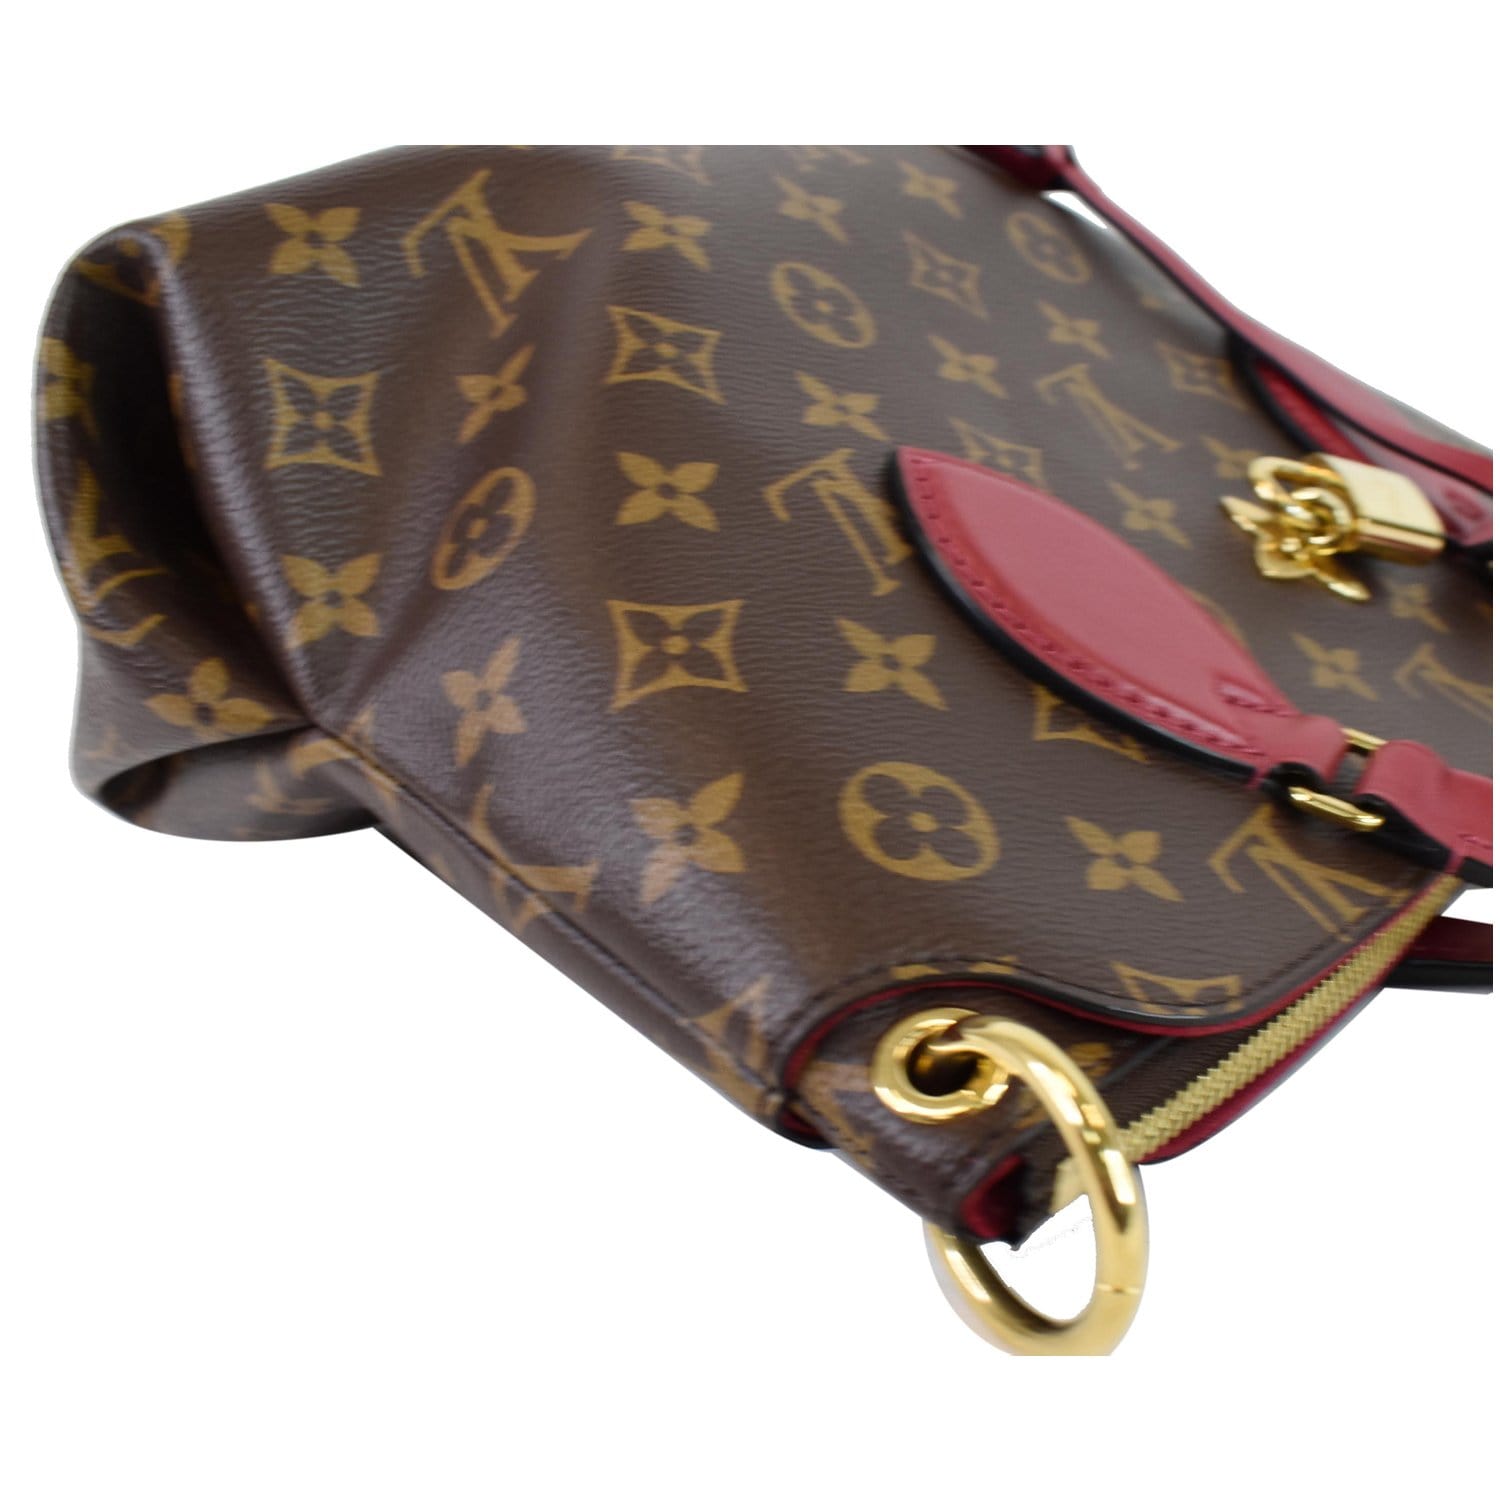 LOUIS VUITTON M40007 FL0045 MONOGRAM PATTERNED TOTE BAG MADE IN  FRANCE/ルイヴィトンポパンクールオモノグラム柄トートバッグ2000000052618